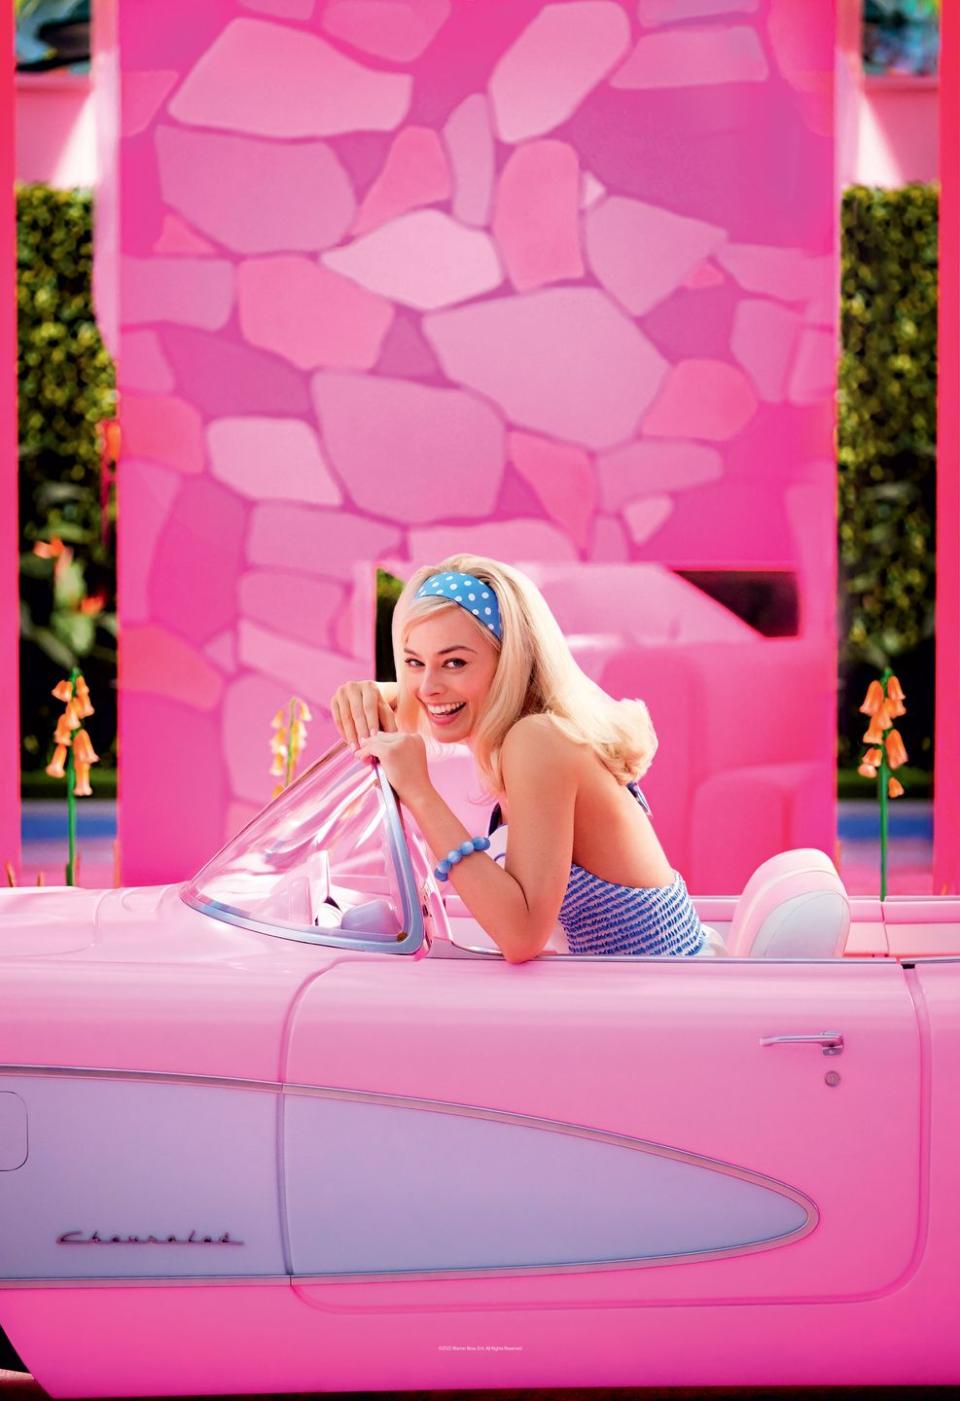 margot robbie, as barbie, sits in a pink car and smiles in a first look photo from the barbie movie